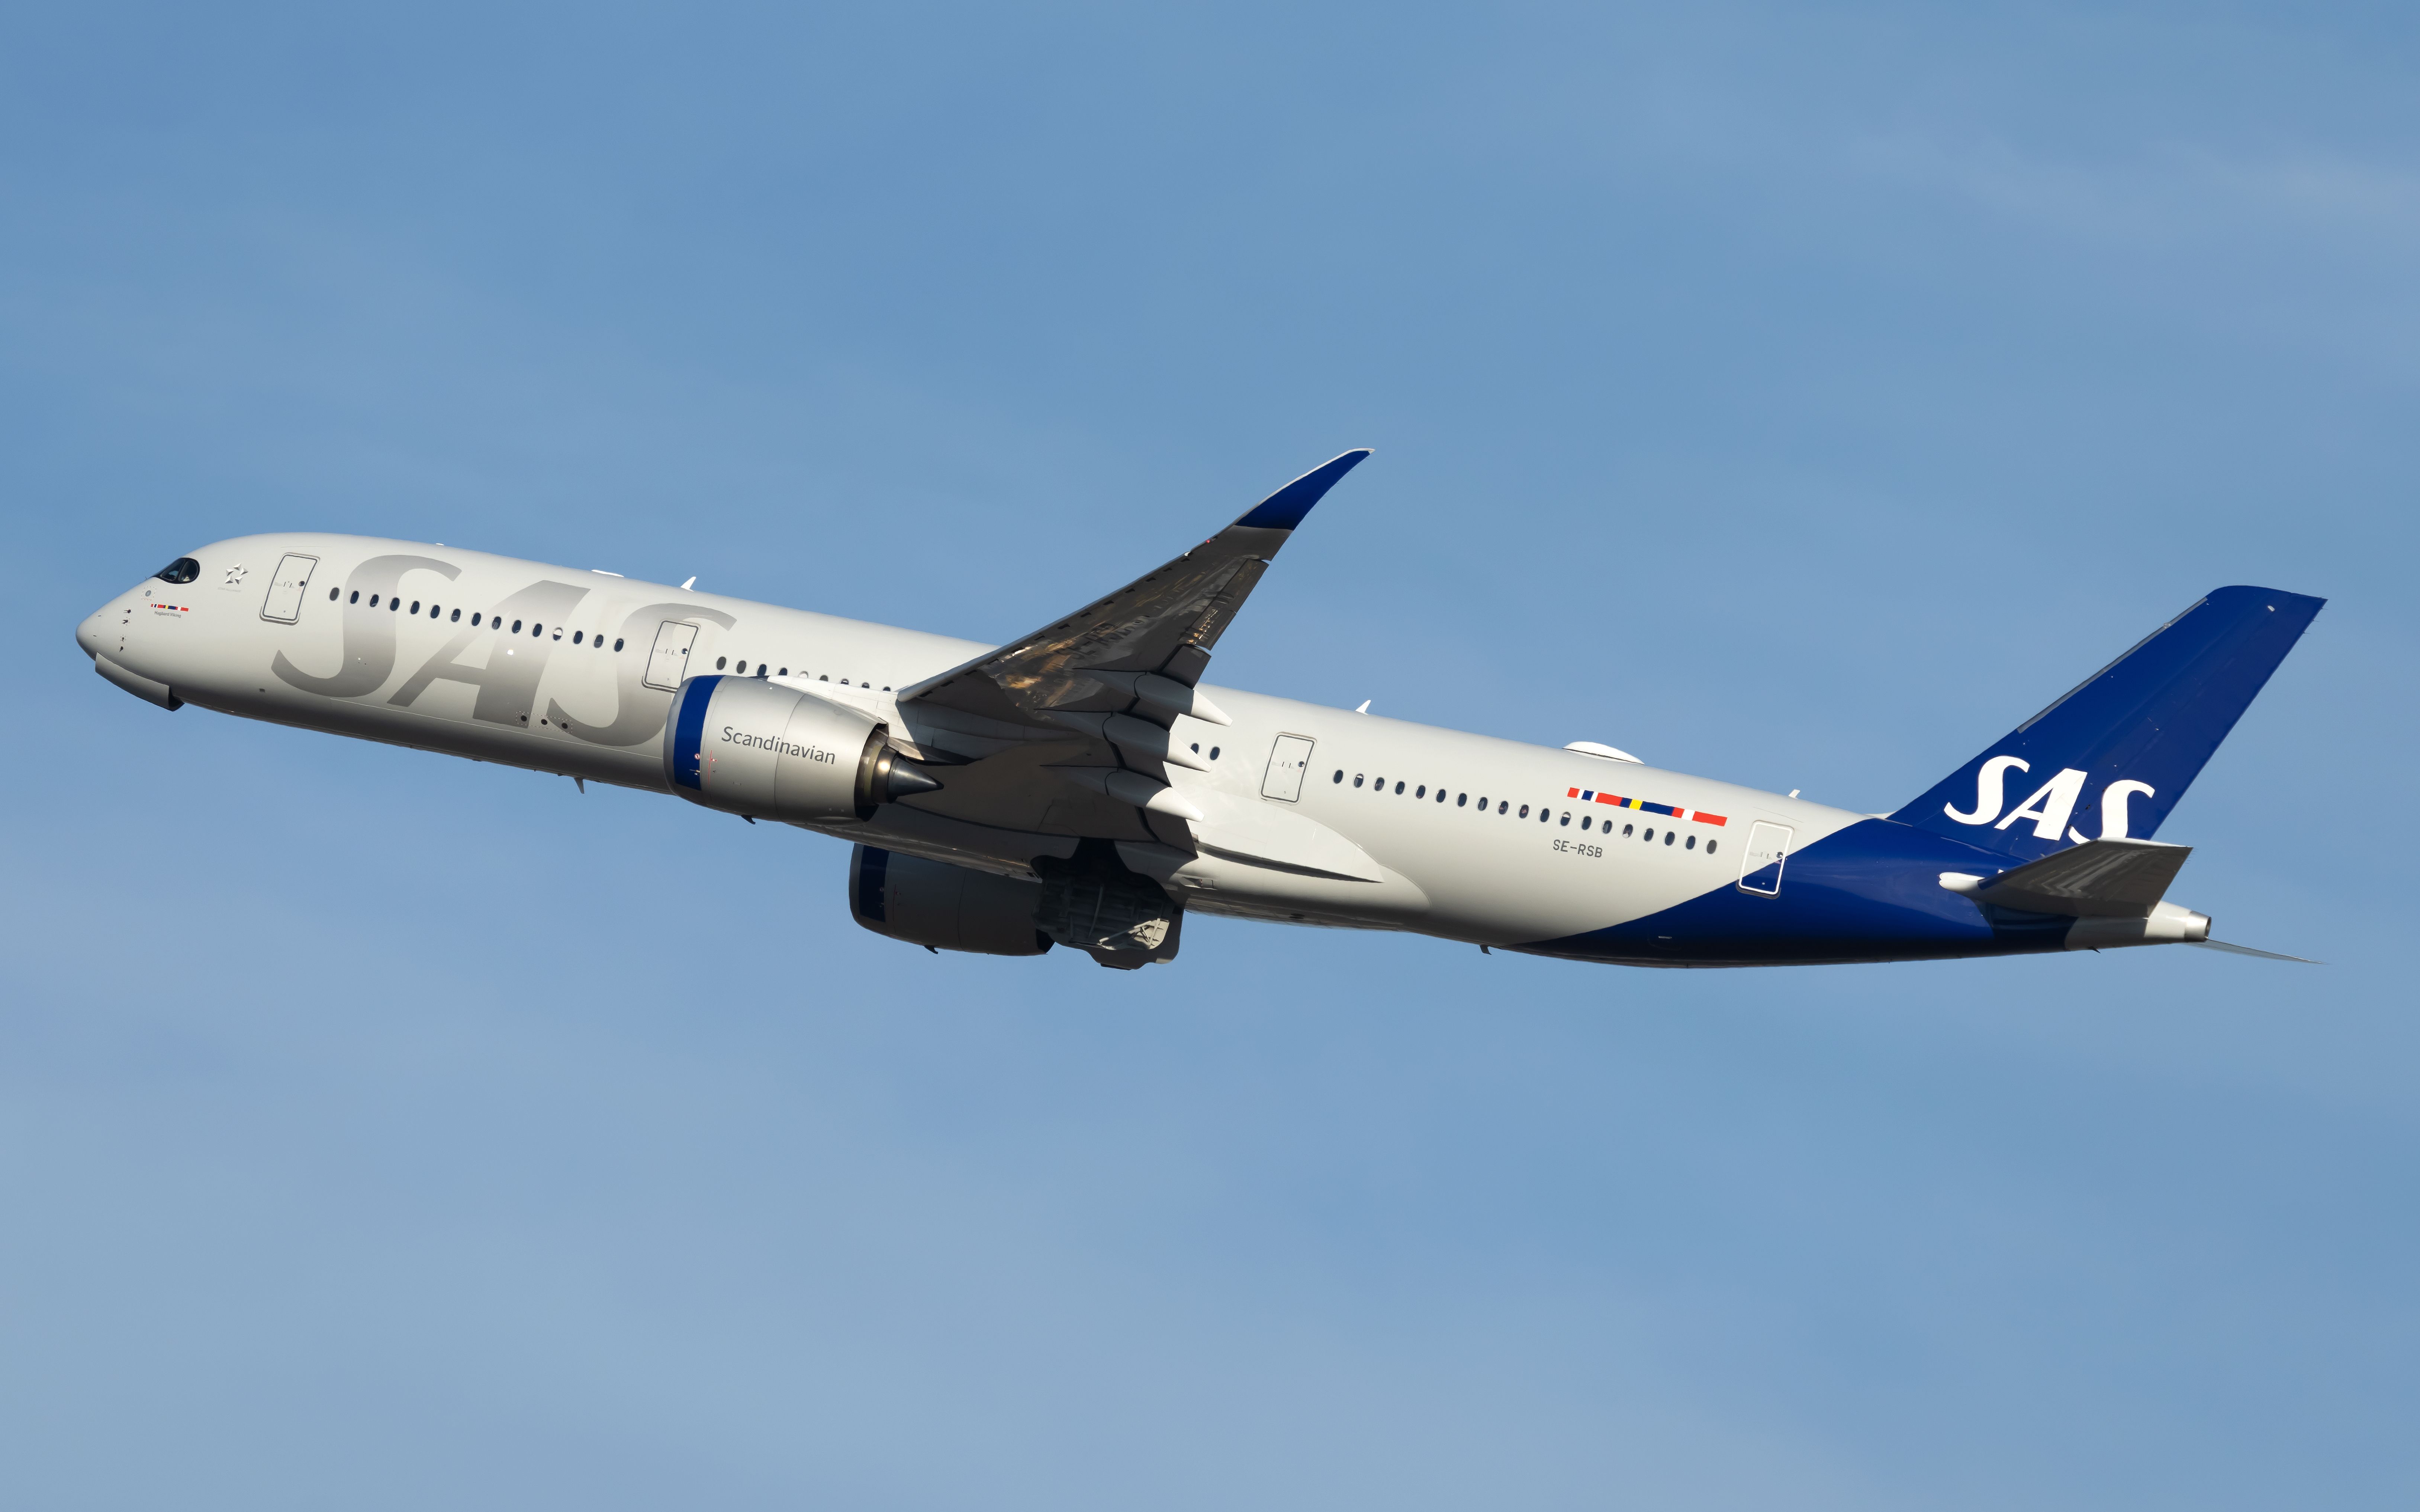 An SAS Airbus A350-941 flying in the sky.